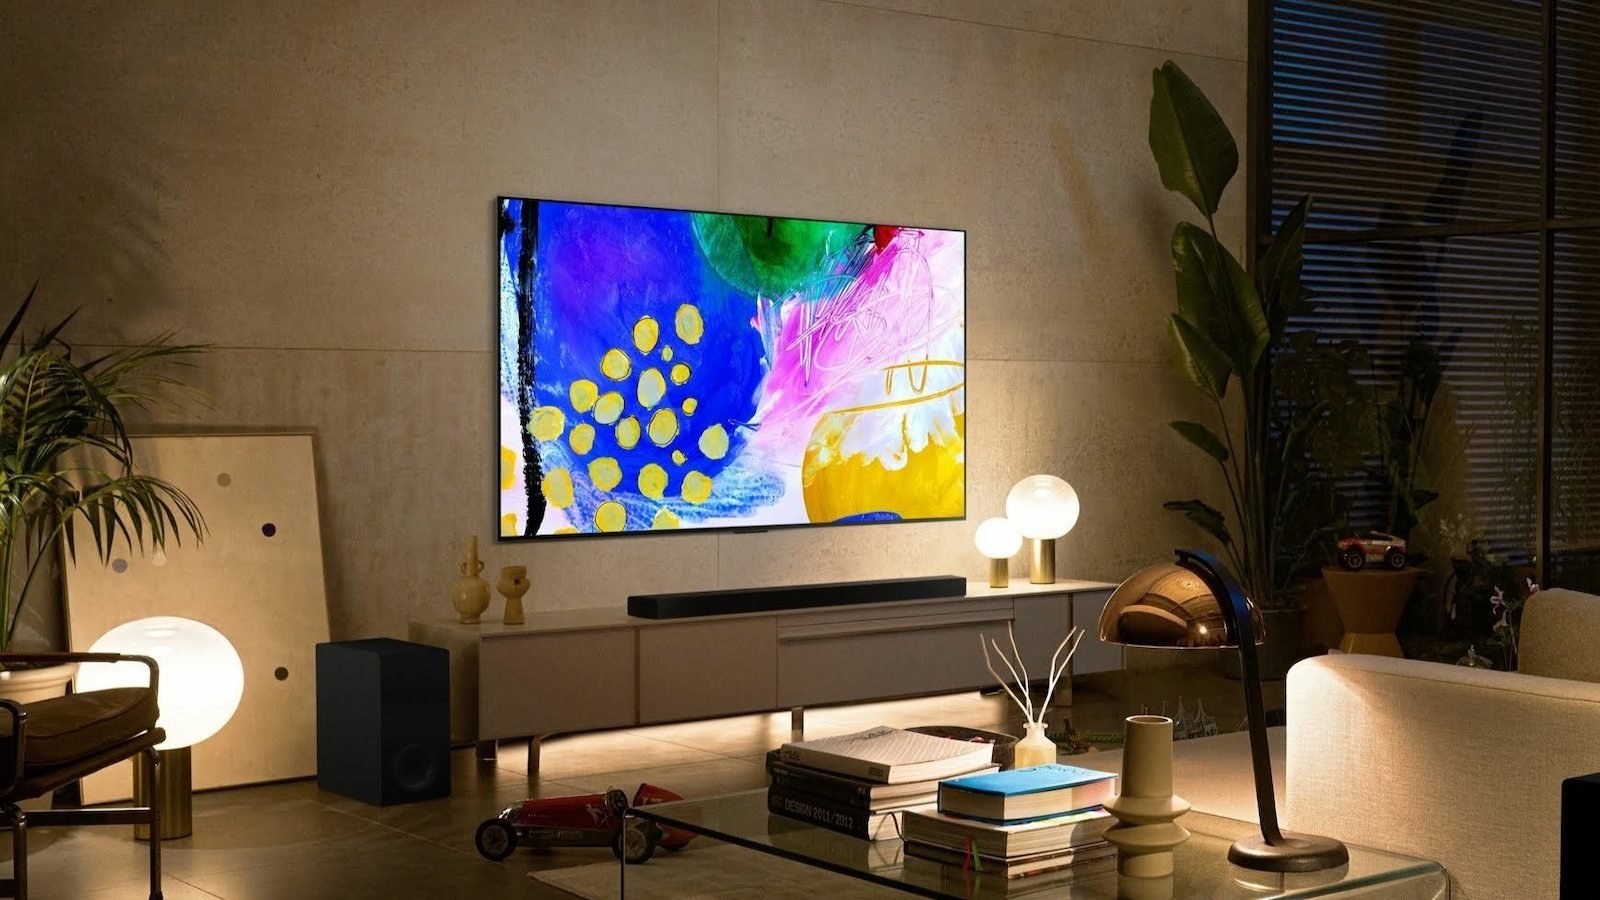 LG G2 2022 OLED TV Series has 4 sizes and OLED evo technology for realistic images